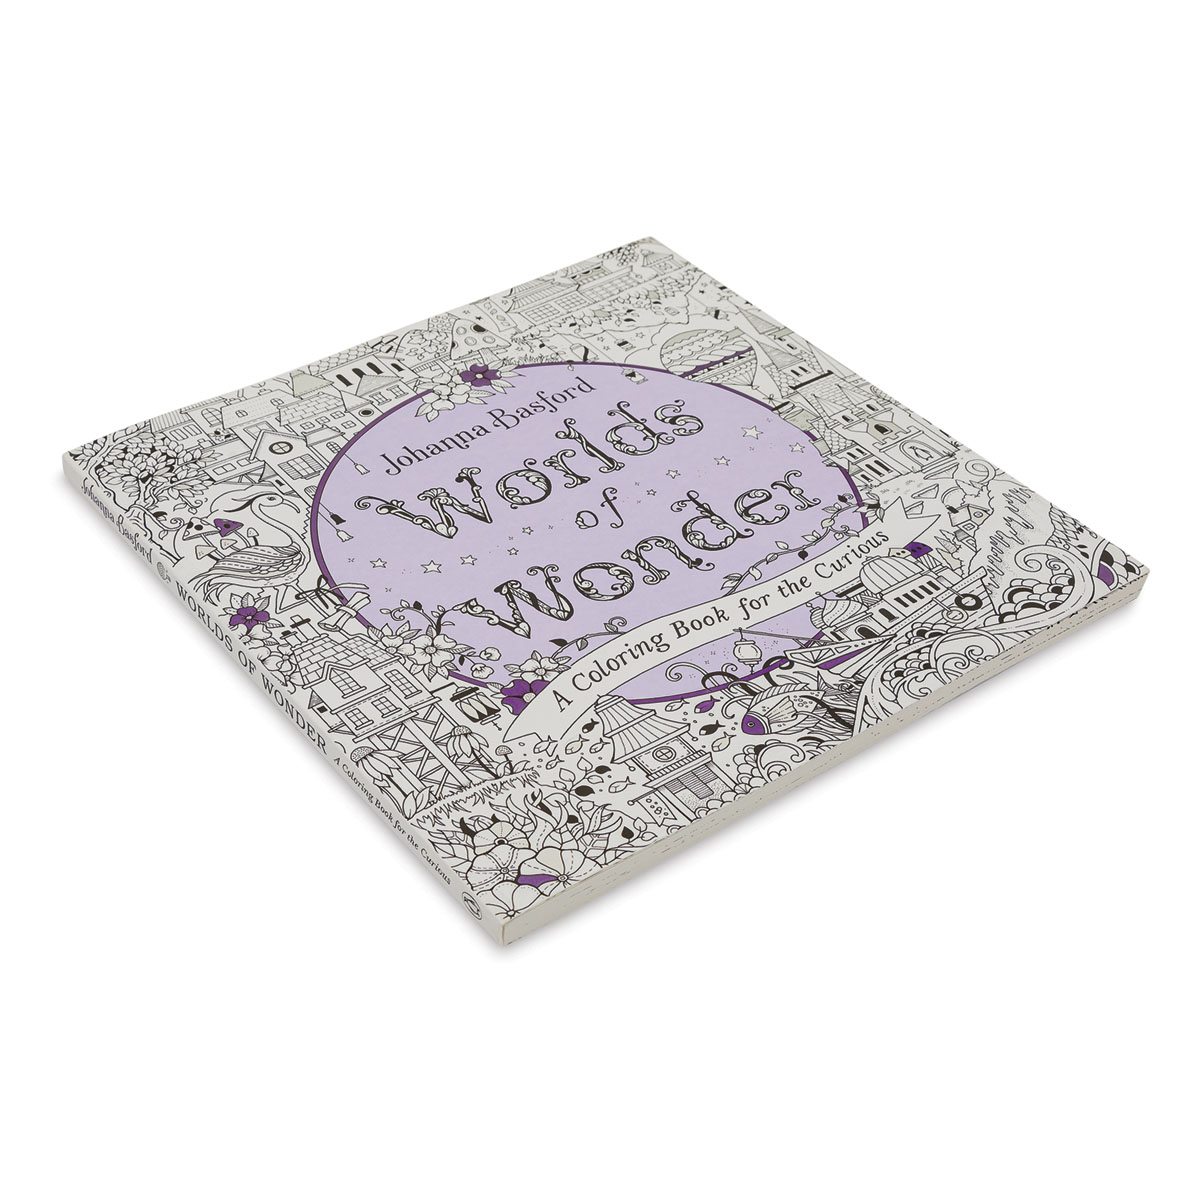 Worlds of Wonder: A Coloring Book for the Curious [Book]